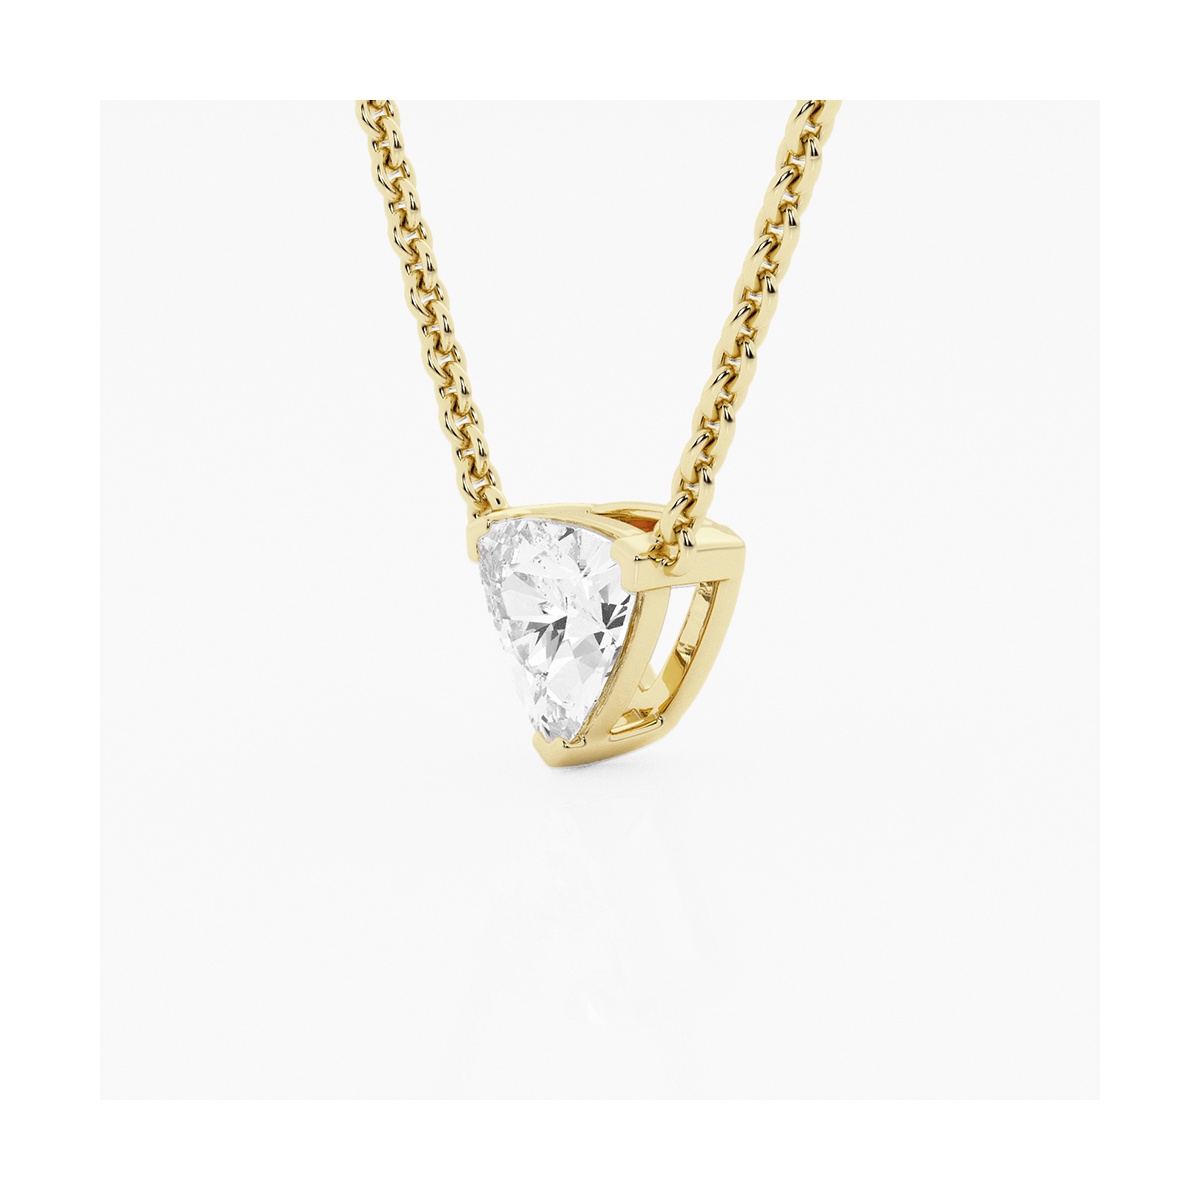 Additional Image 1 for  näas Ethereal 1 ctw Trillion Lab Grown Diamond Solitaire Pendant with Adjustable Chain